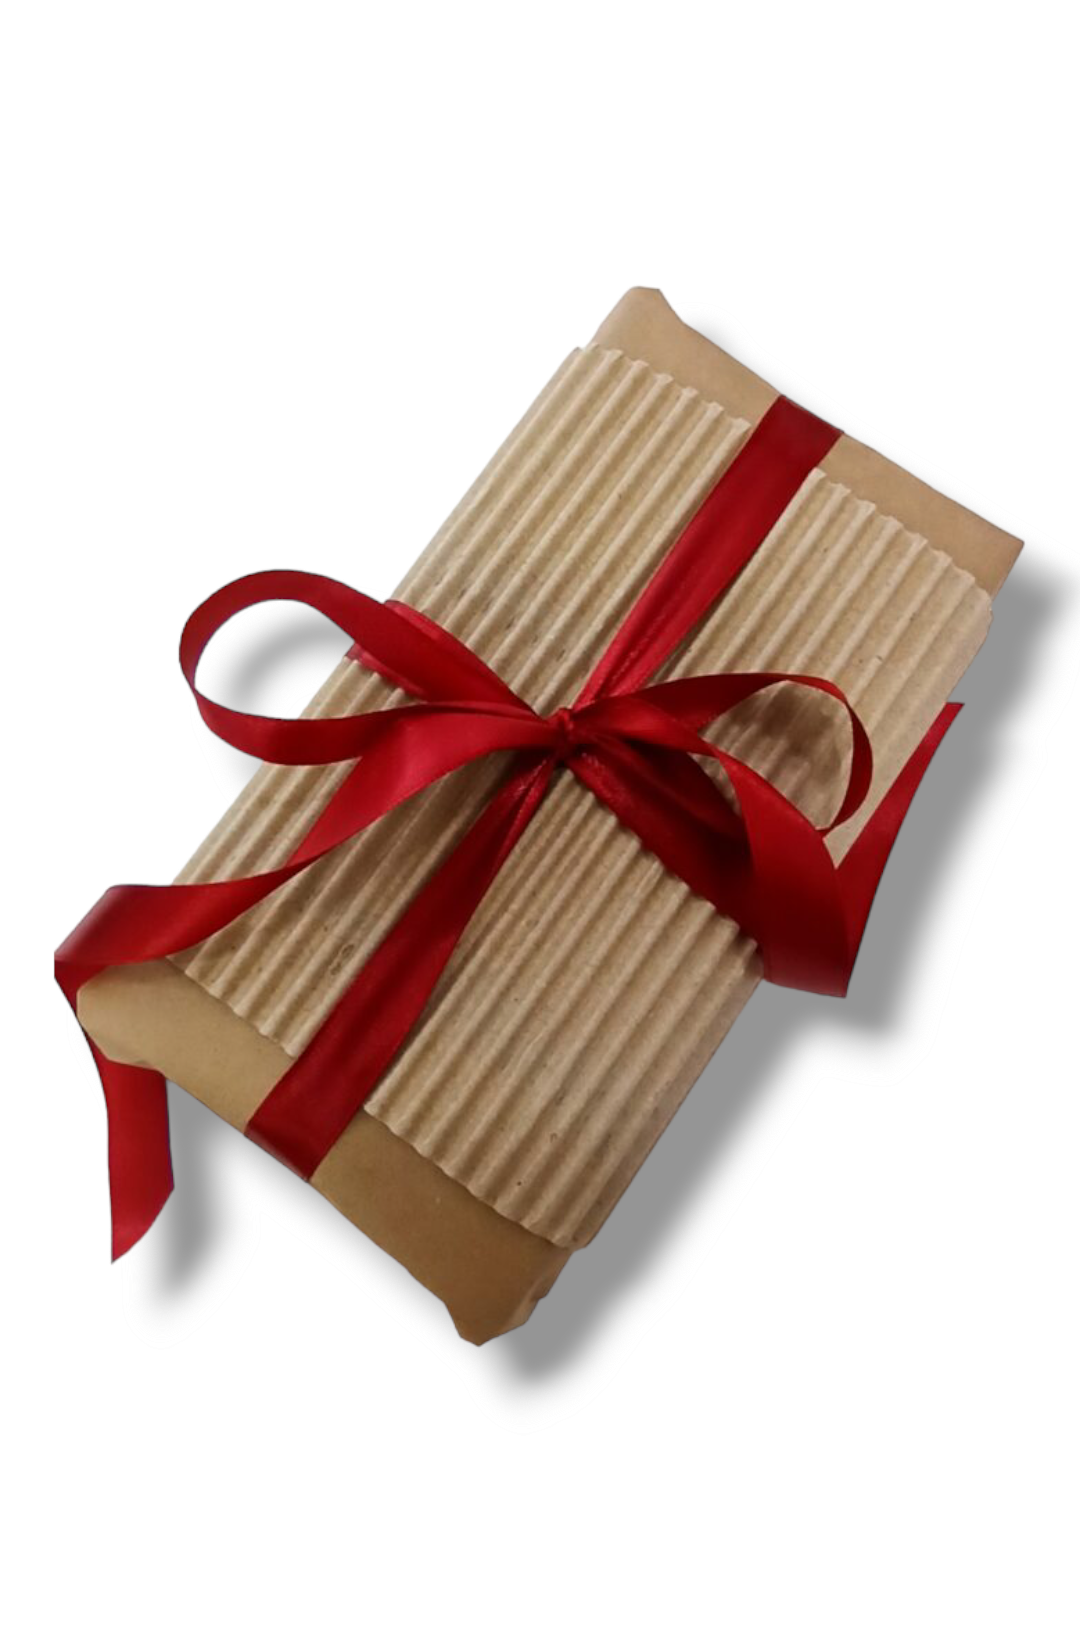 Wraping as a gift